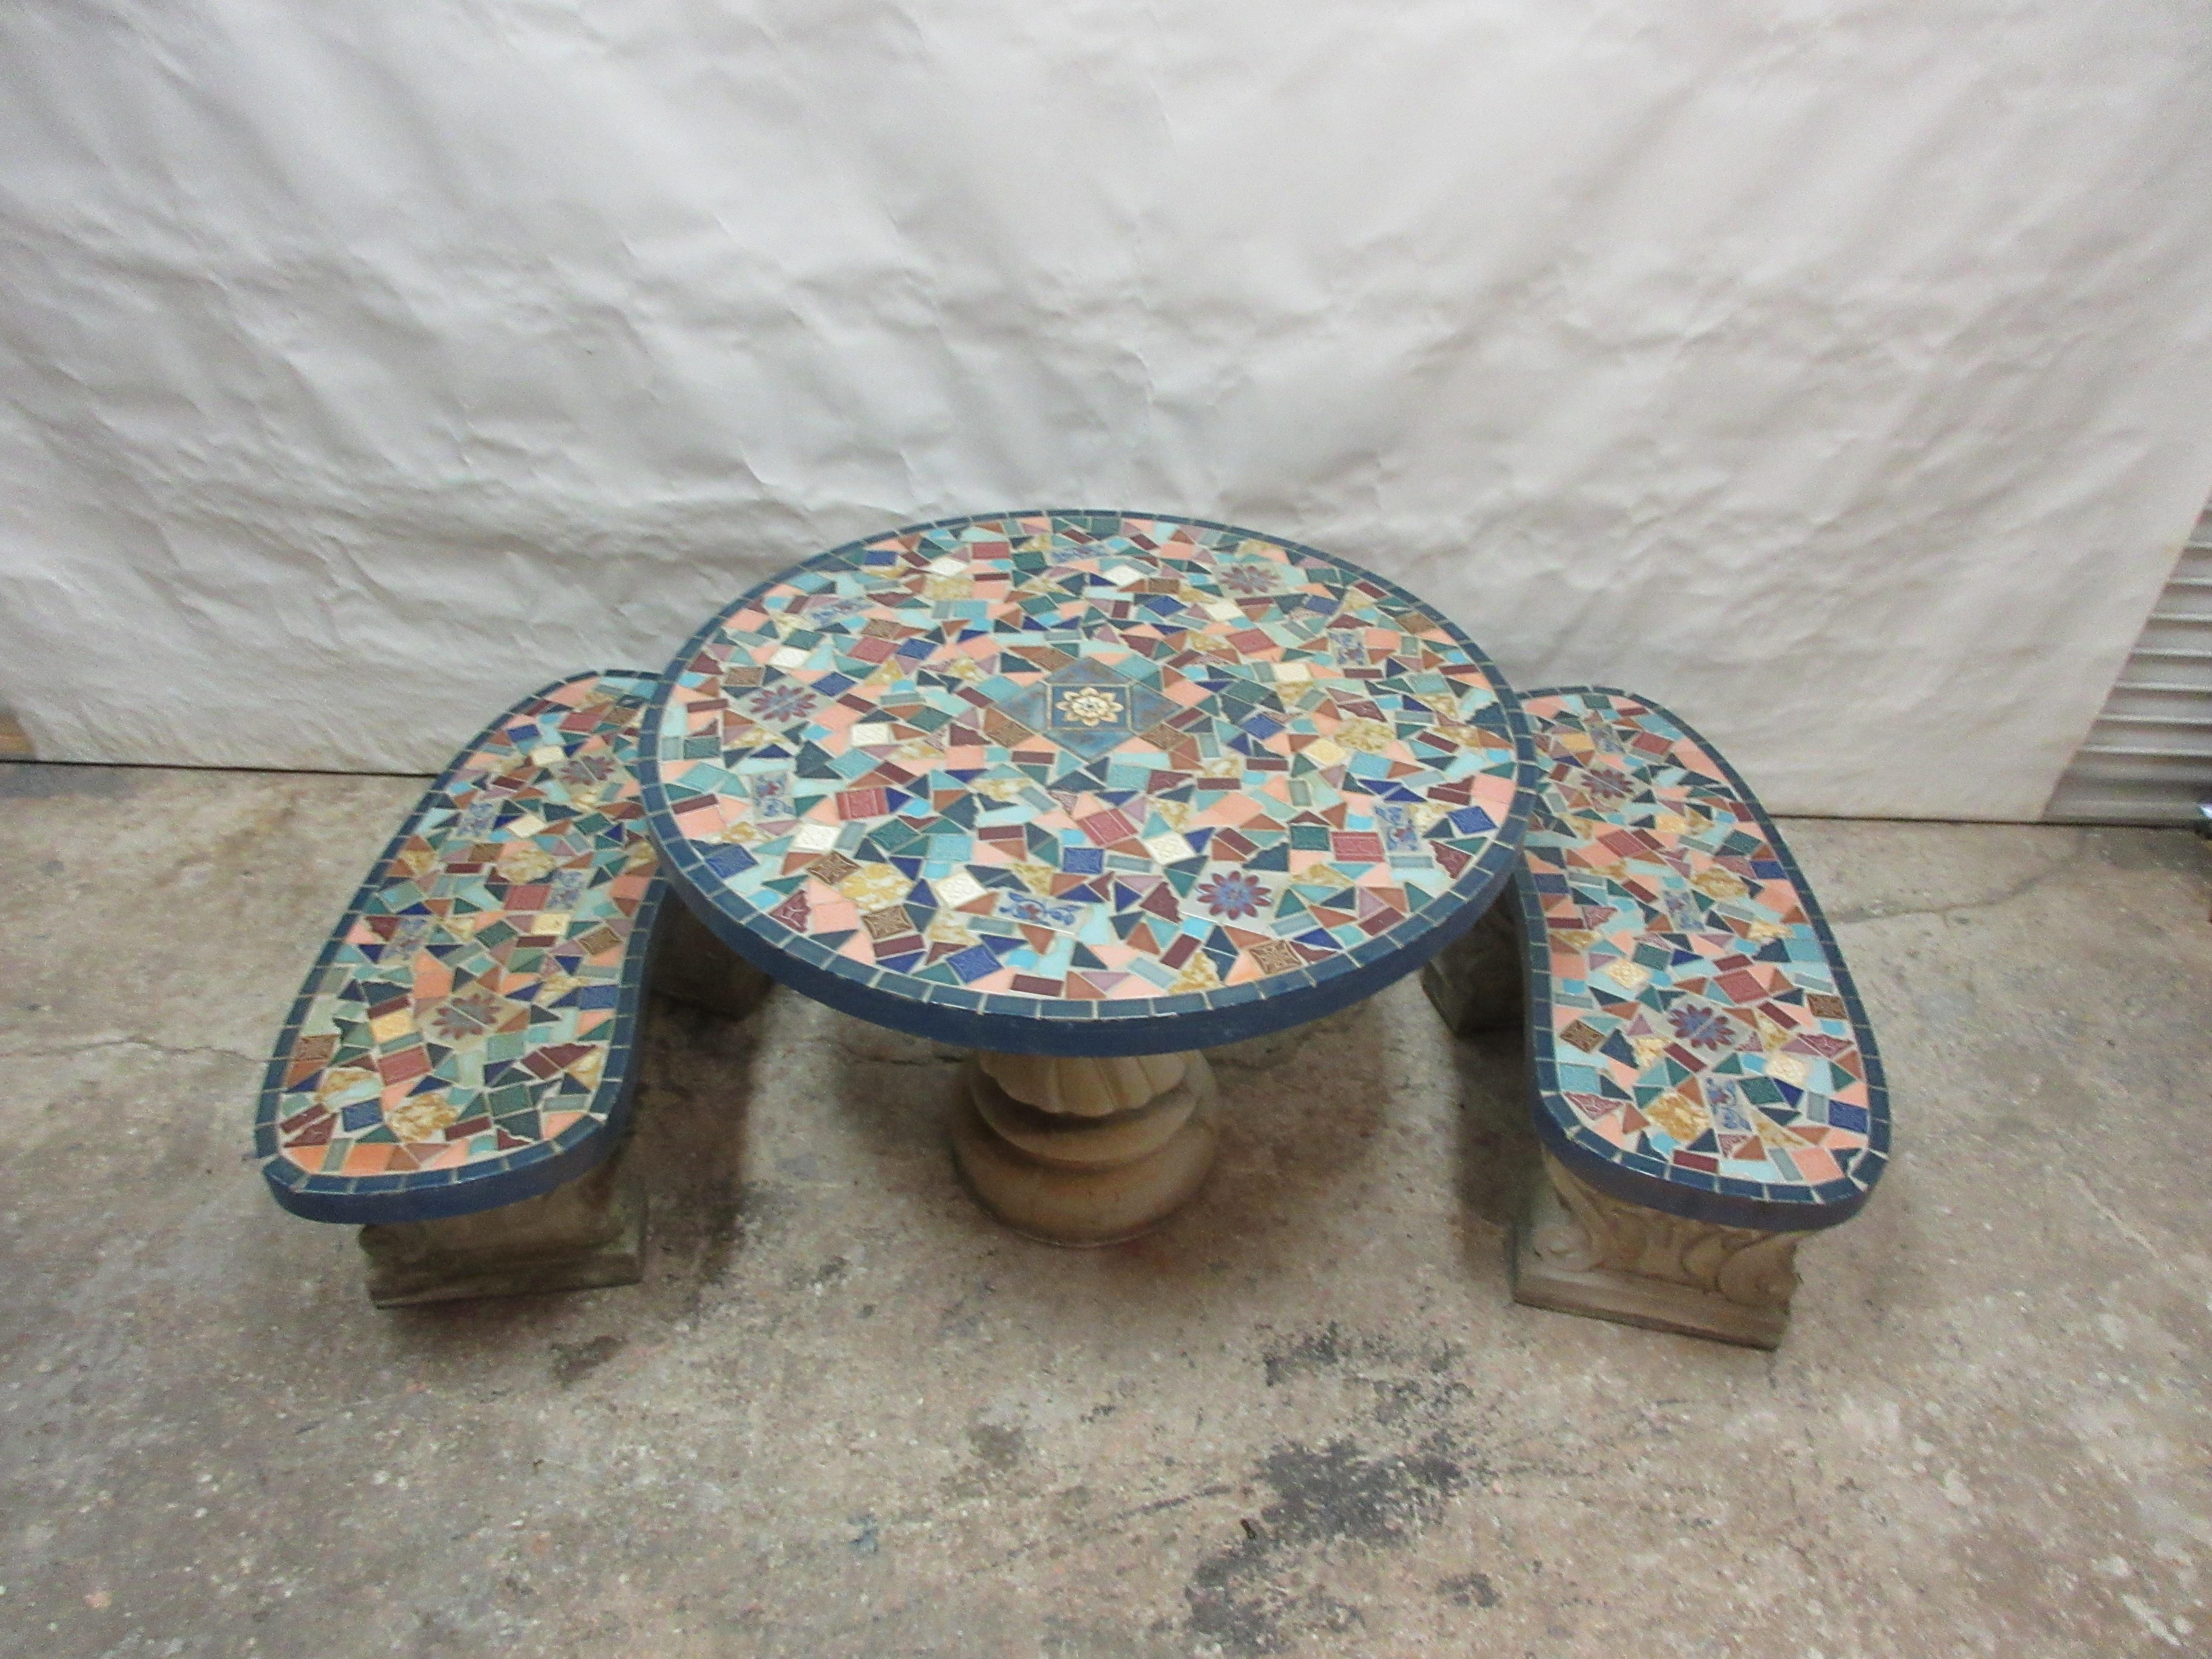 This is a 3 piece set of Vintage Garden Mosaic Tile Table and Benches
Benches measure 16 h x 15 d x 39 L